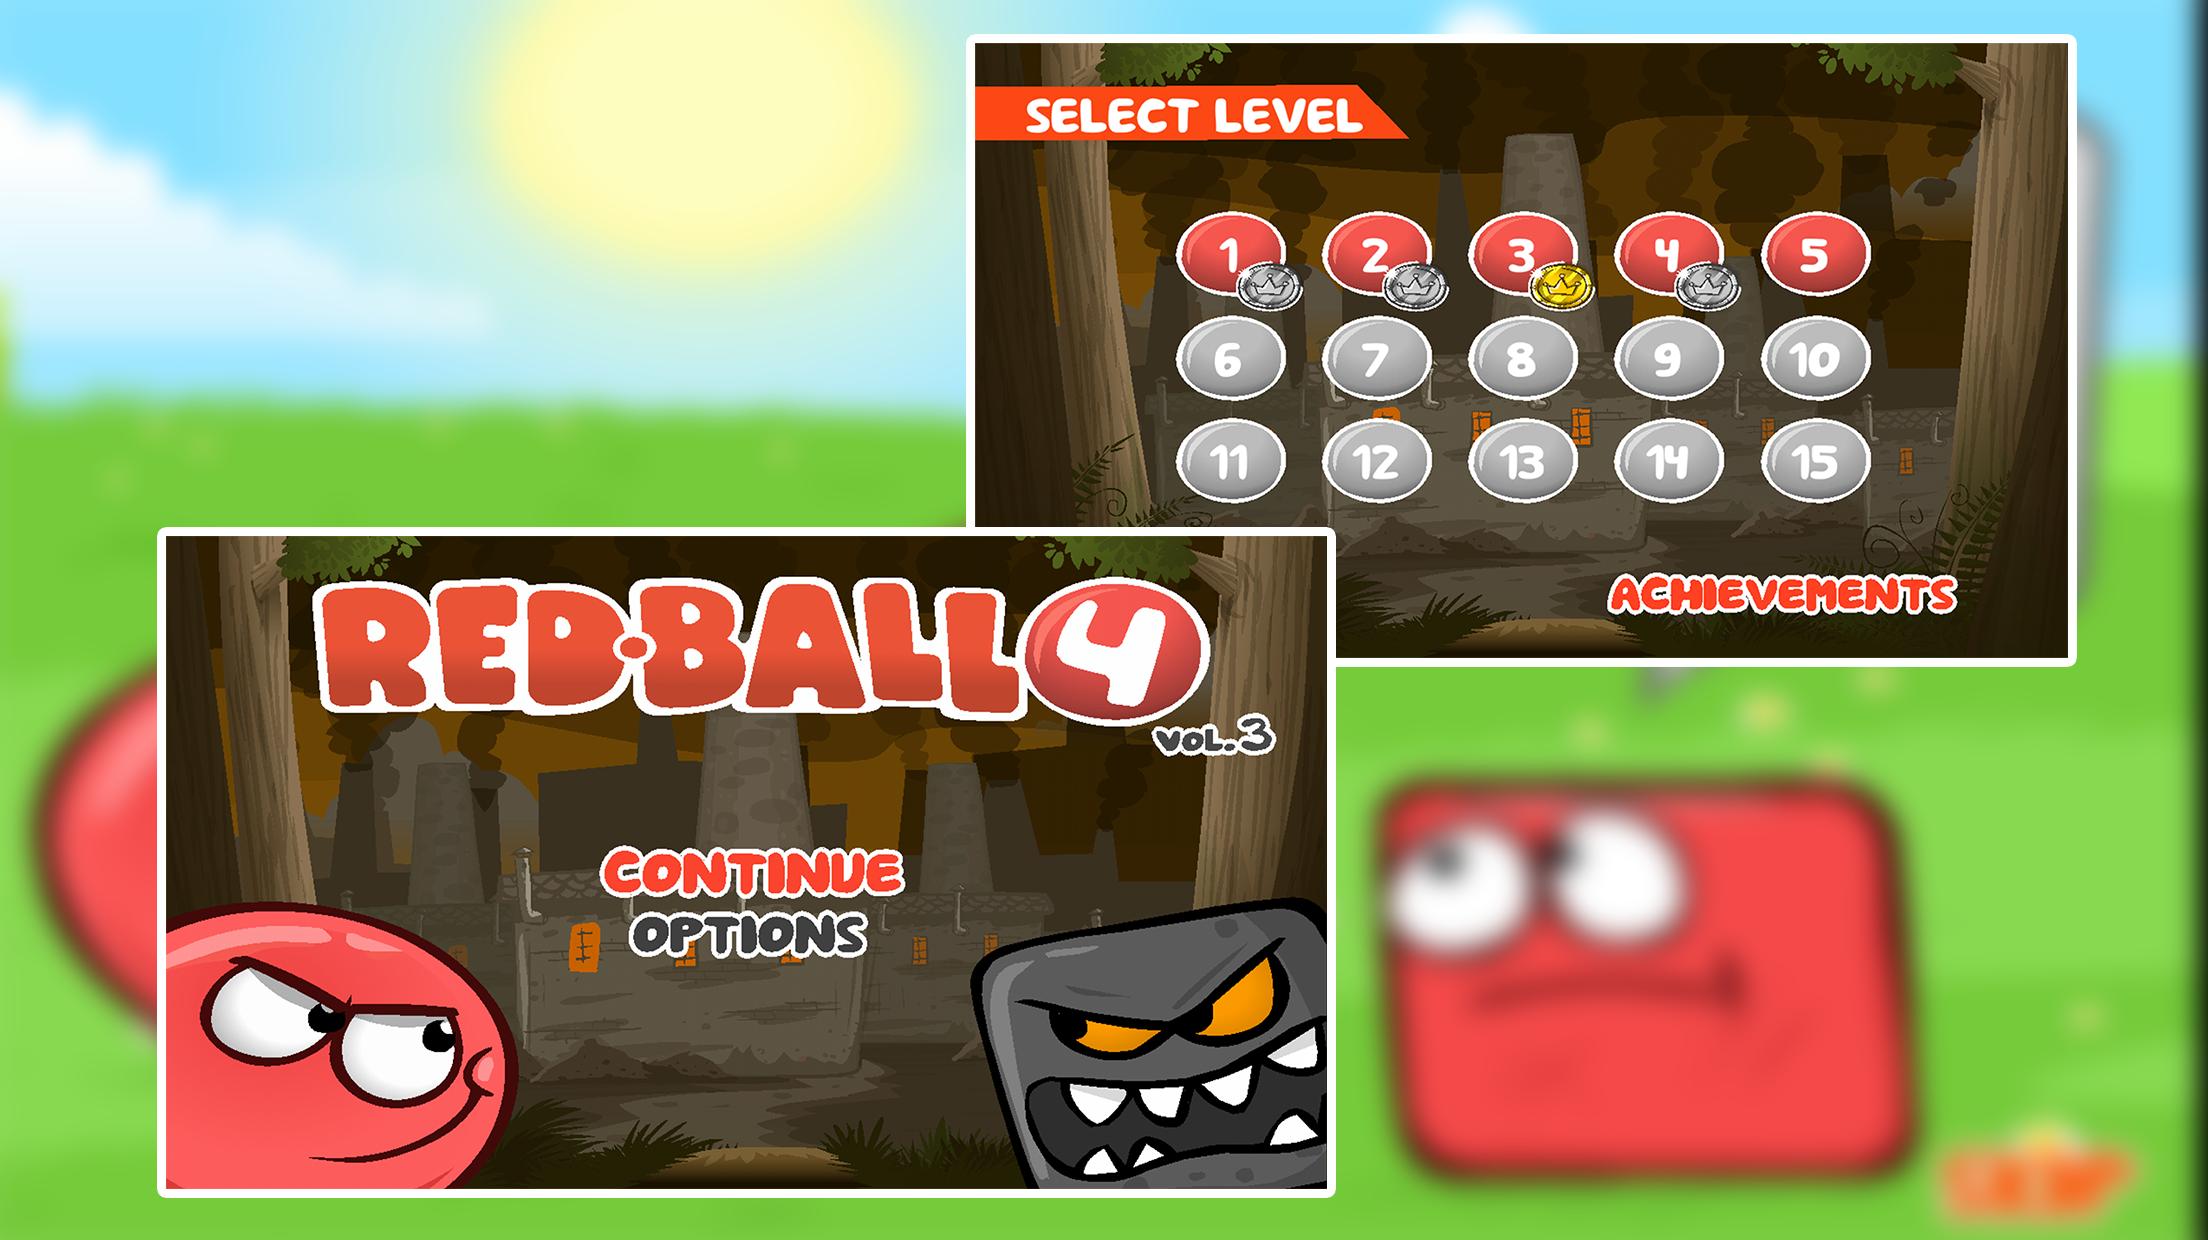 Red Ball Hero 4 - Rolling Ball Volume 3 APK pour Android Télécharger